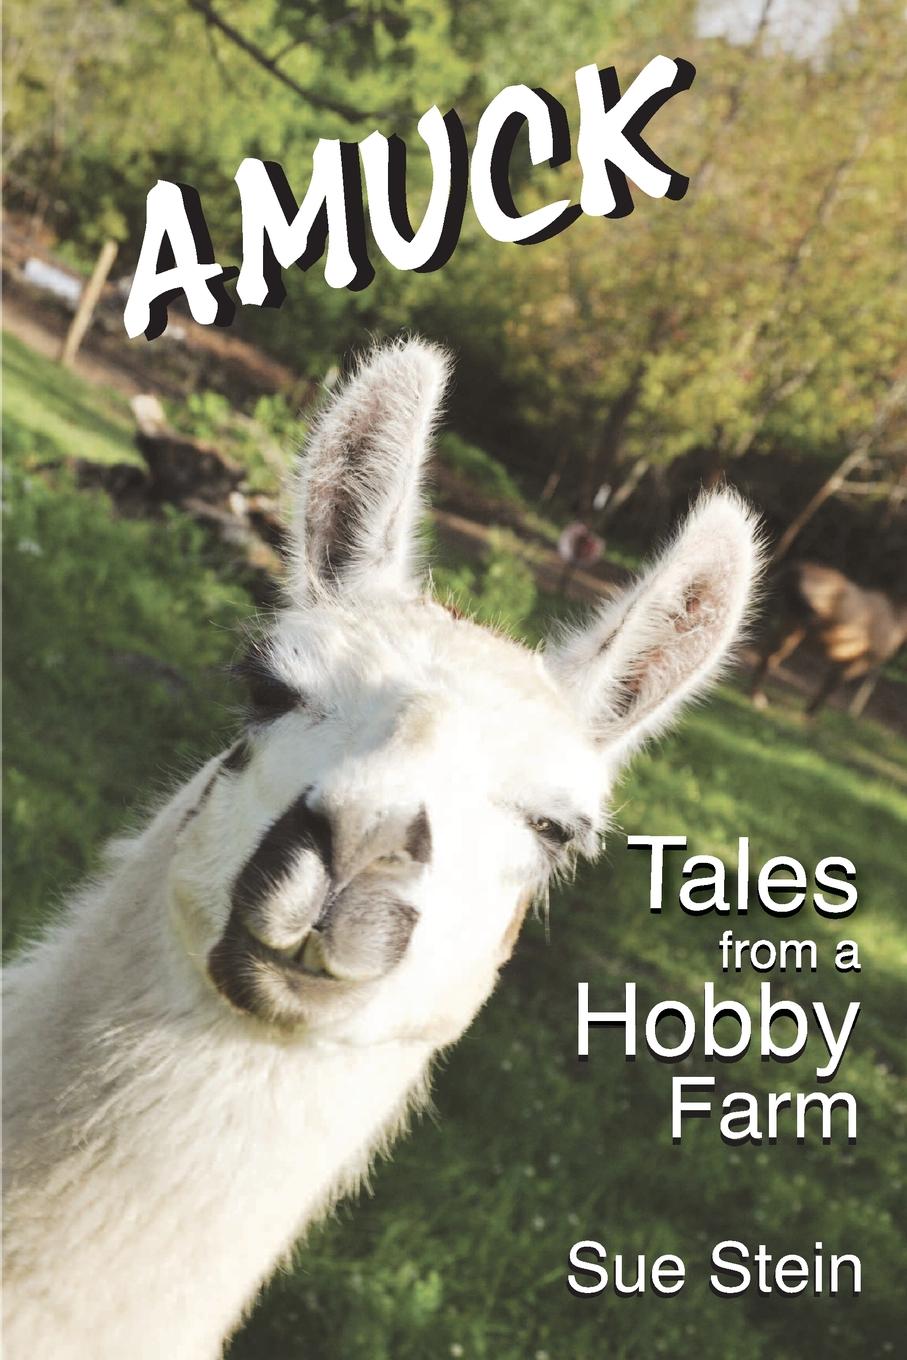 Amuck. Tales From a Hobby Farm